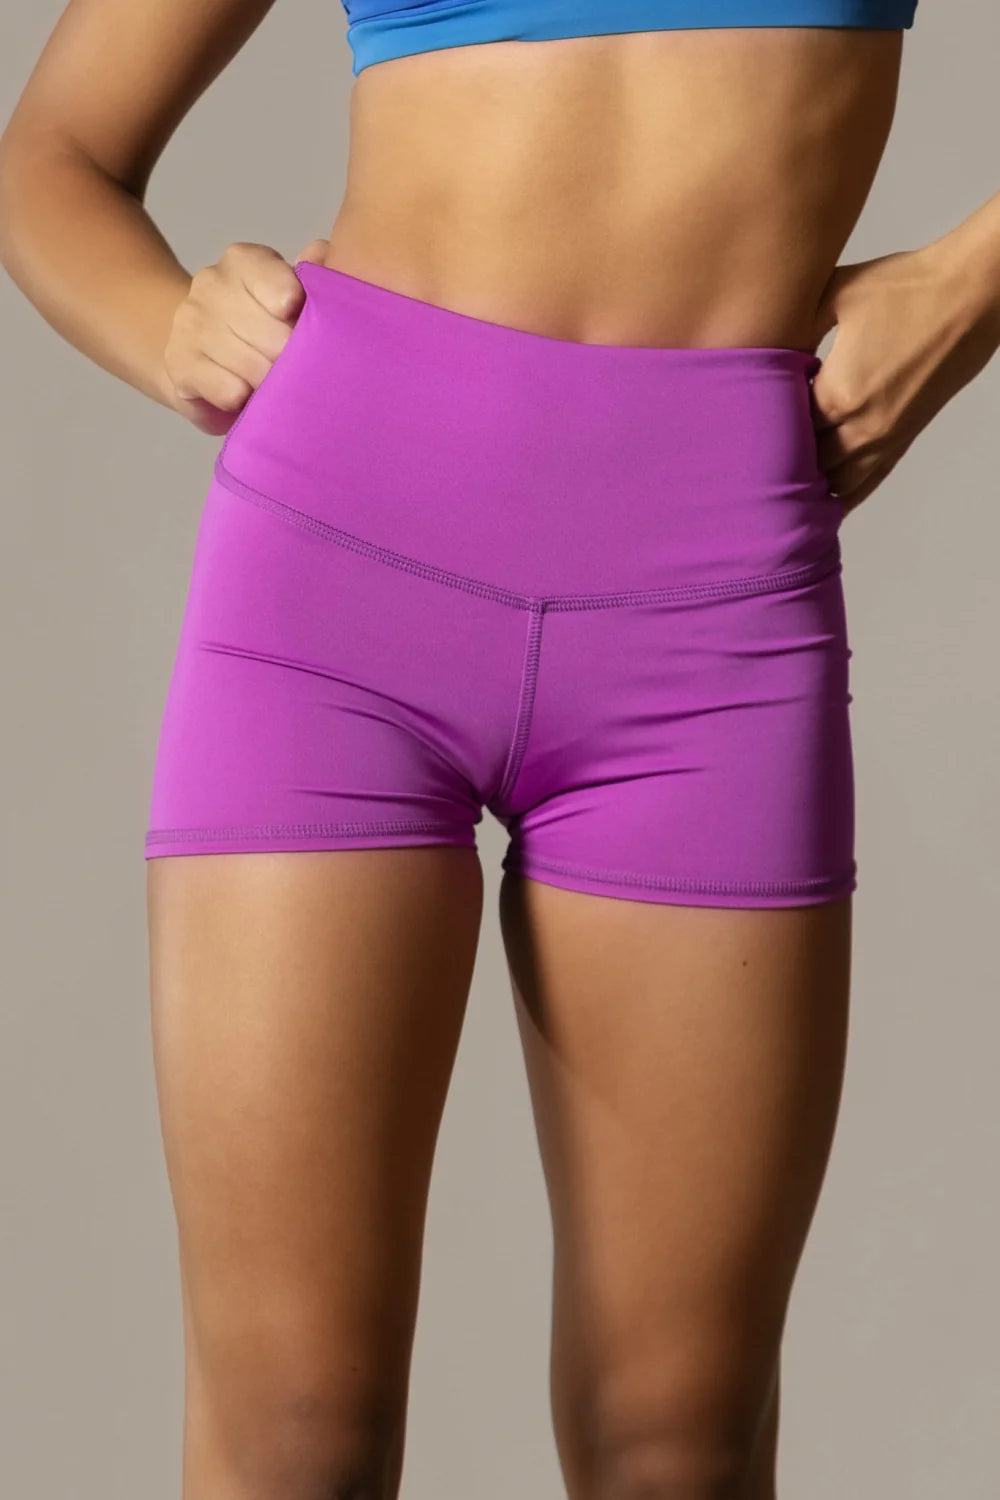 Tiger Friday Shorties Bootie Shorts / Grape